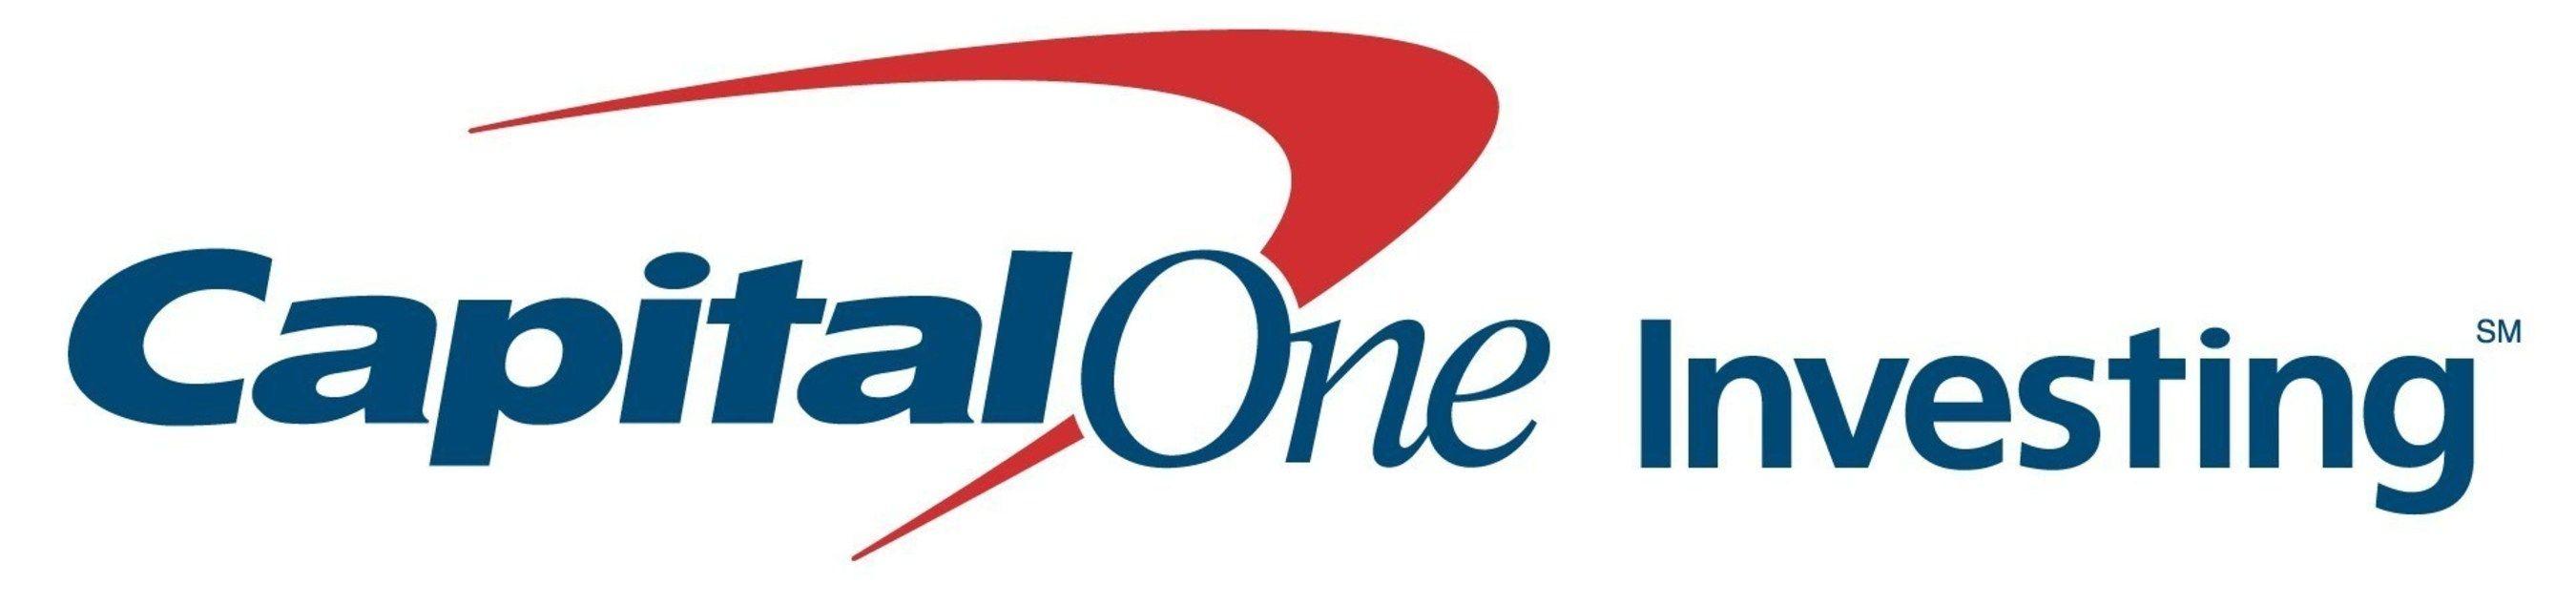 Capital One Financial Logo - Capital One Investing Advisor Connect Offers Unbiased Investment ...